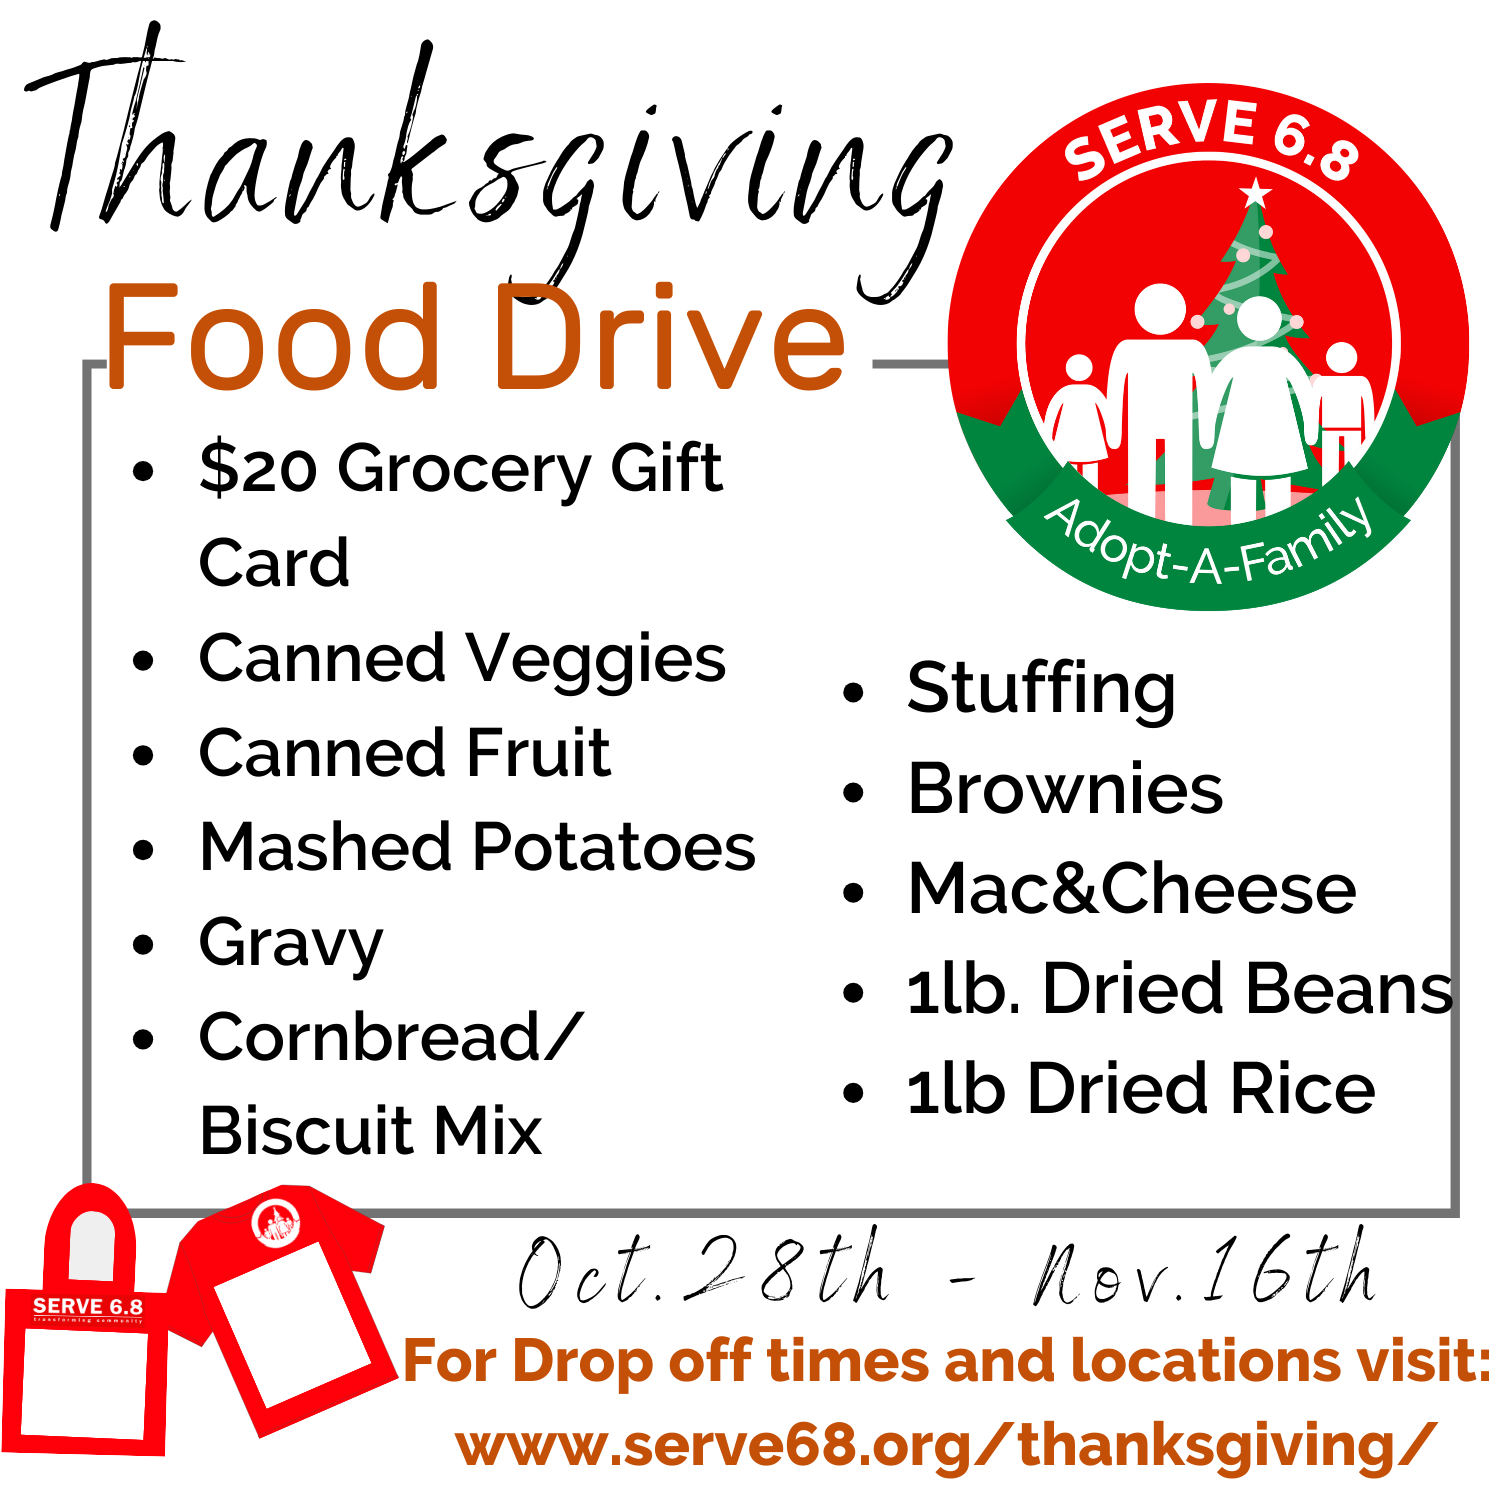 Adopt-a-Family Thanksgiving Drive